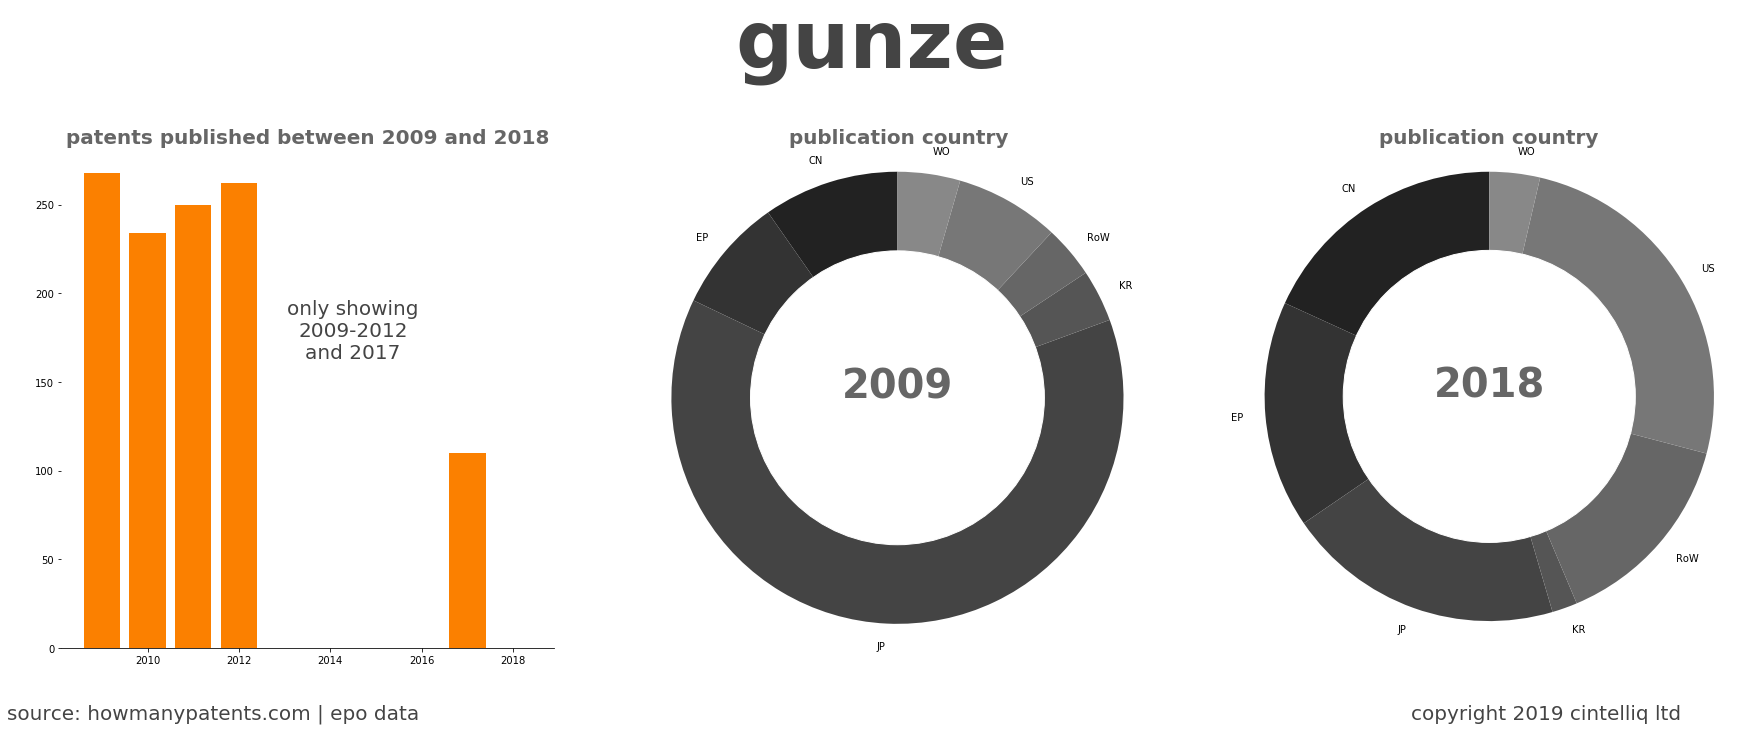 summary of patents for Gunze